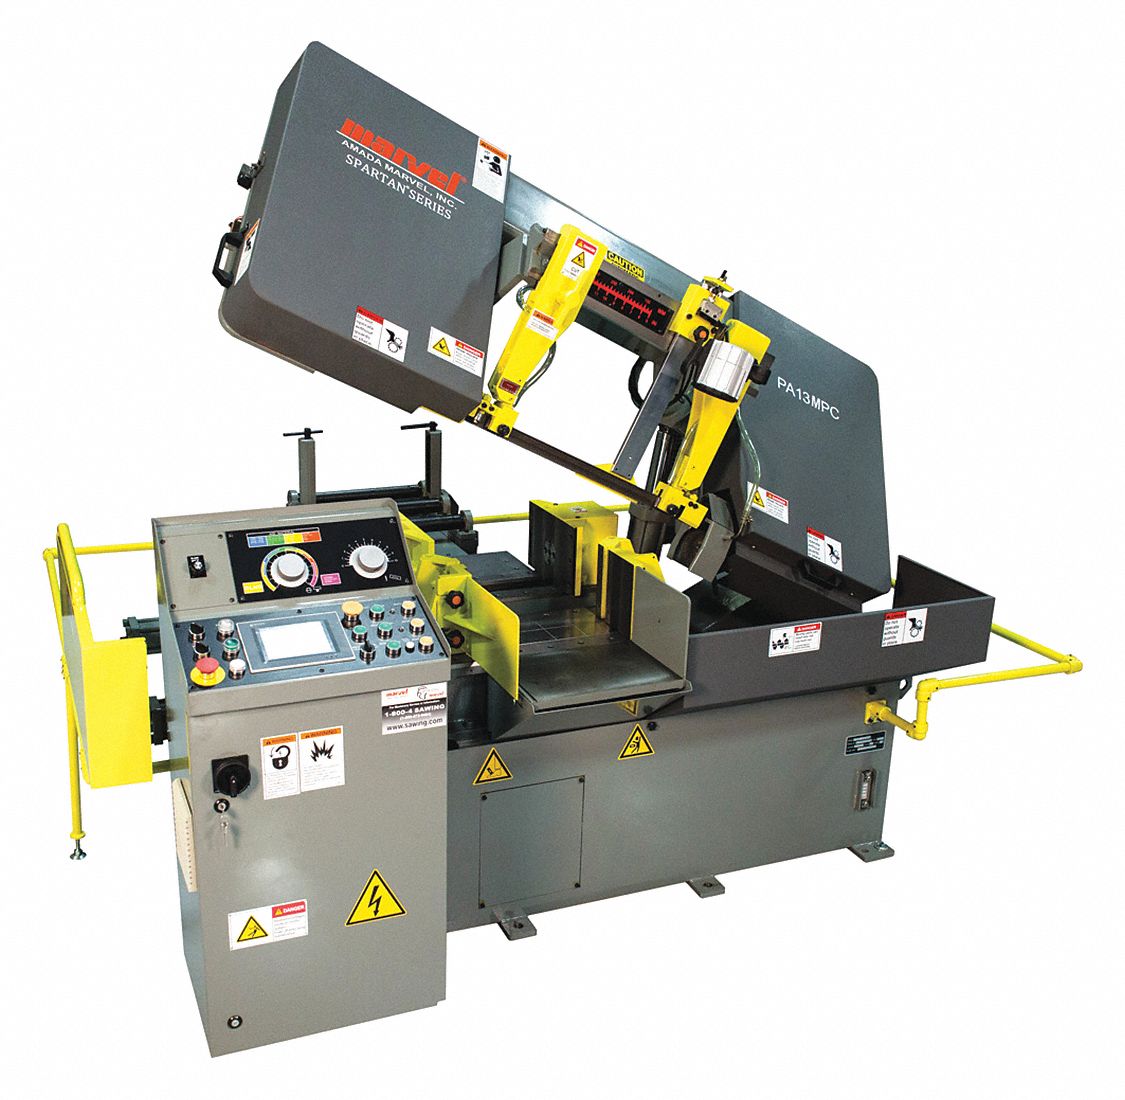 Band Saw: Horizontal, 230V AC, 13 in x 14 in, 60 to 330, 0°, 3 Phase